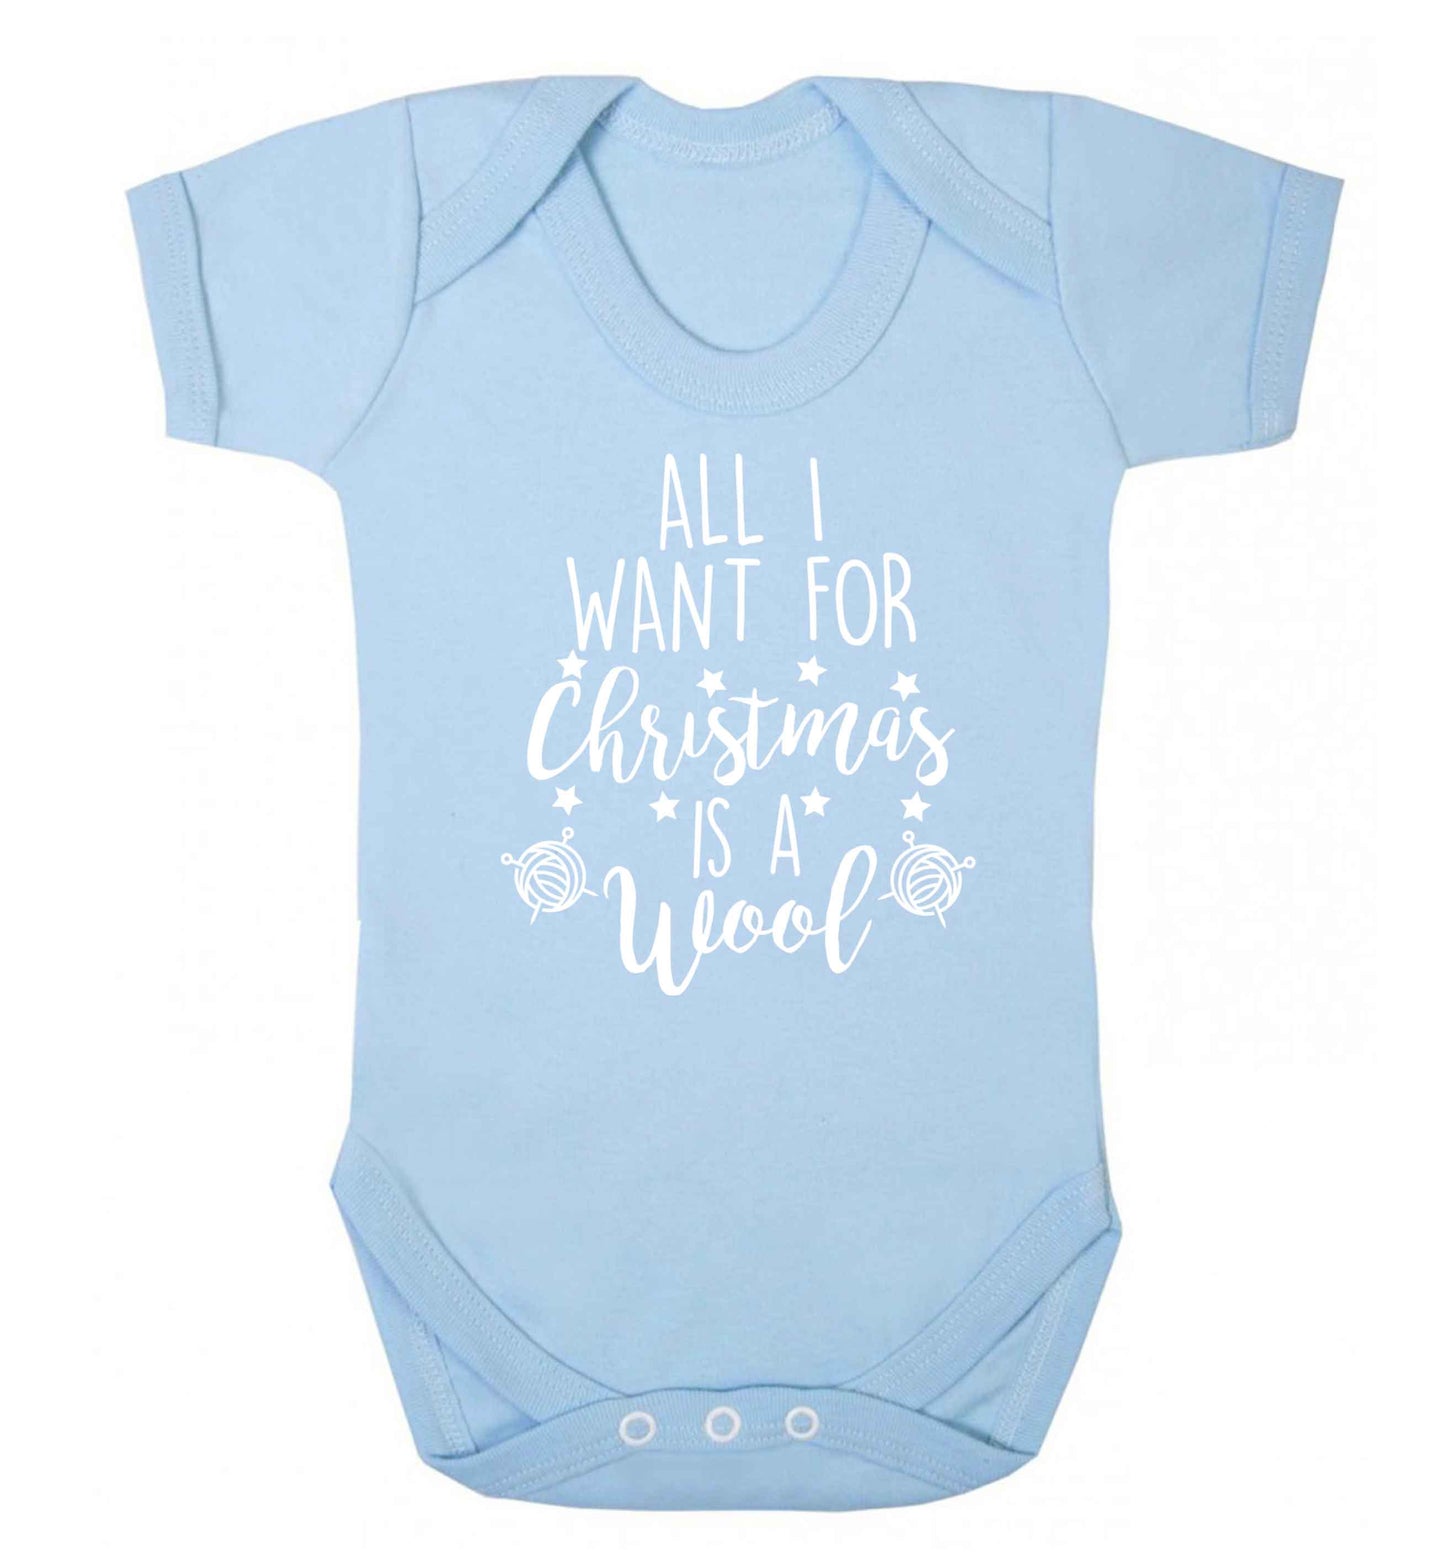 All I want for Christmas is wool! Baby Vest pale blue 18-24 months